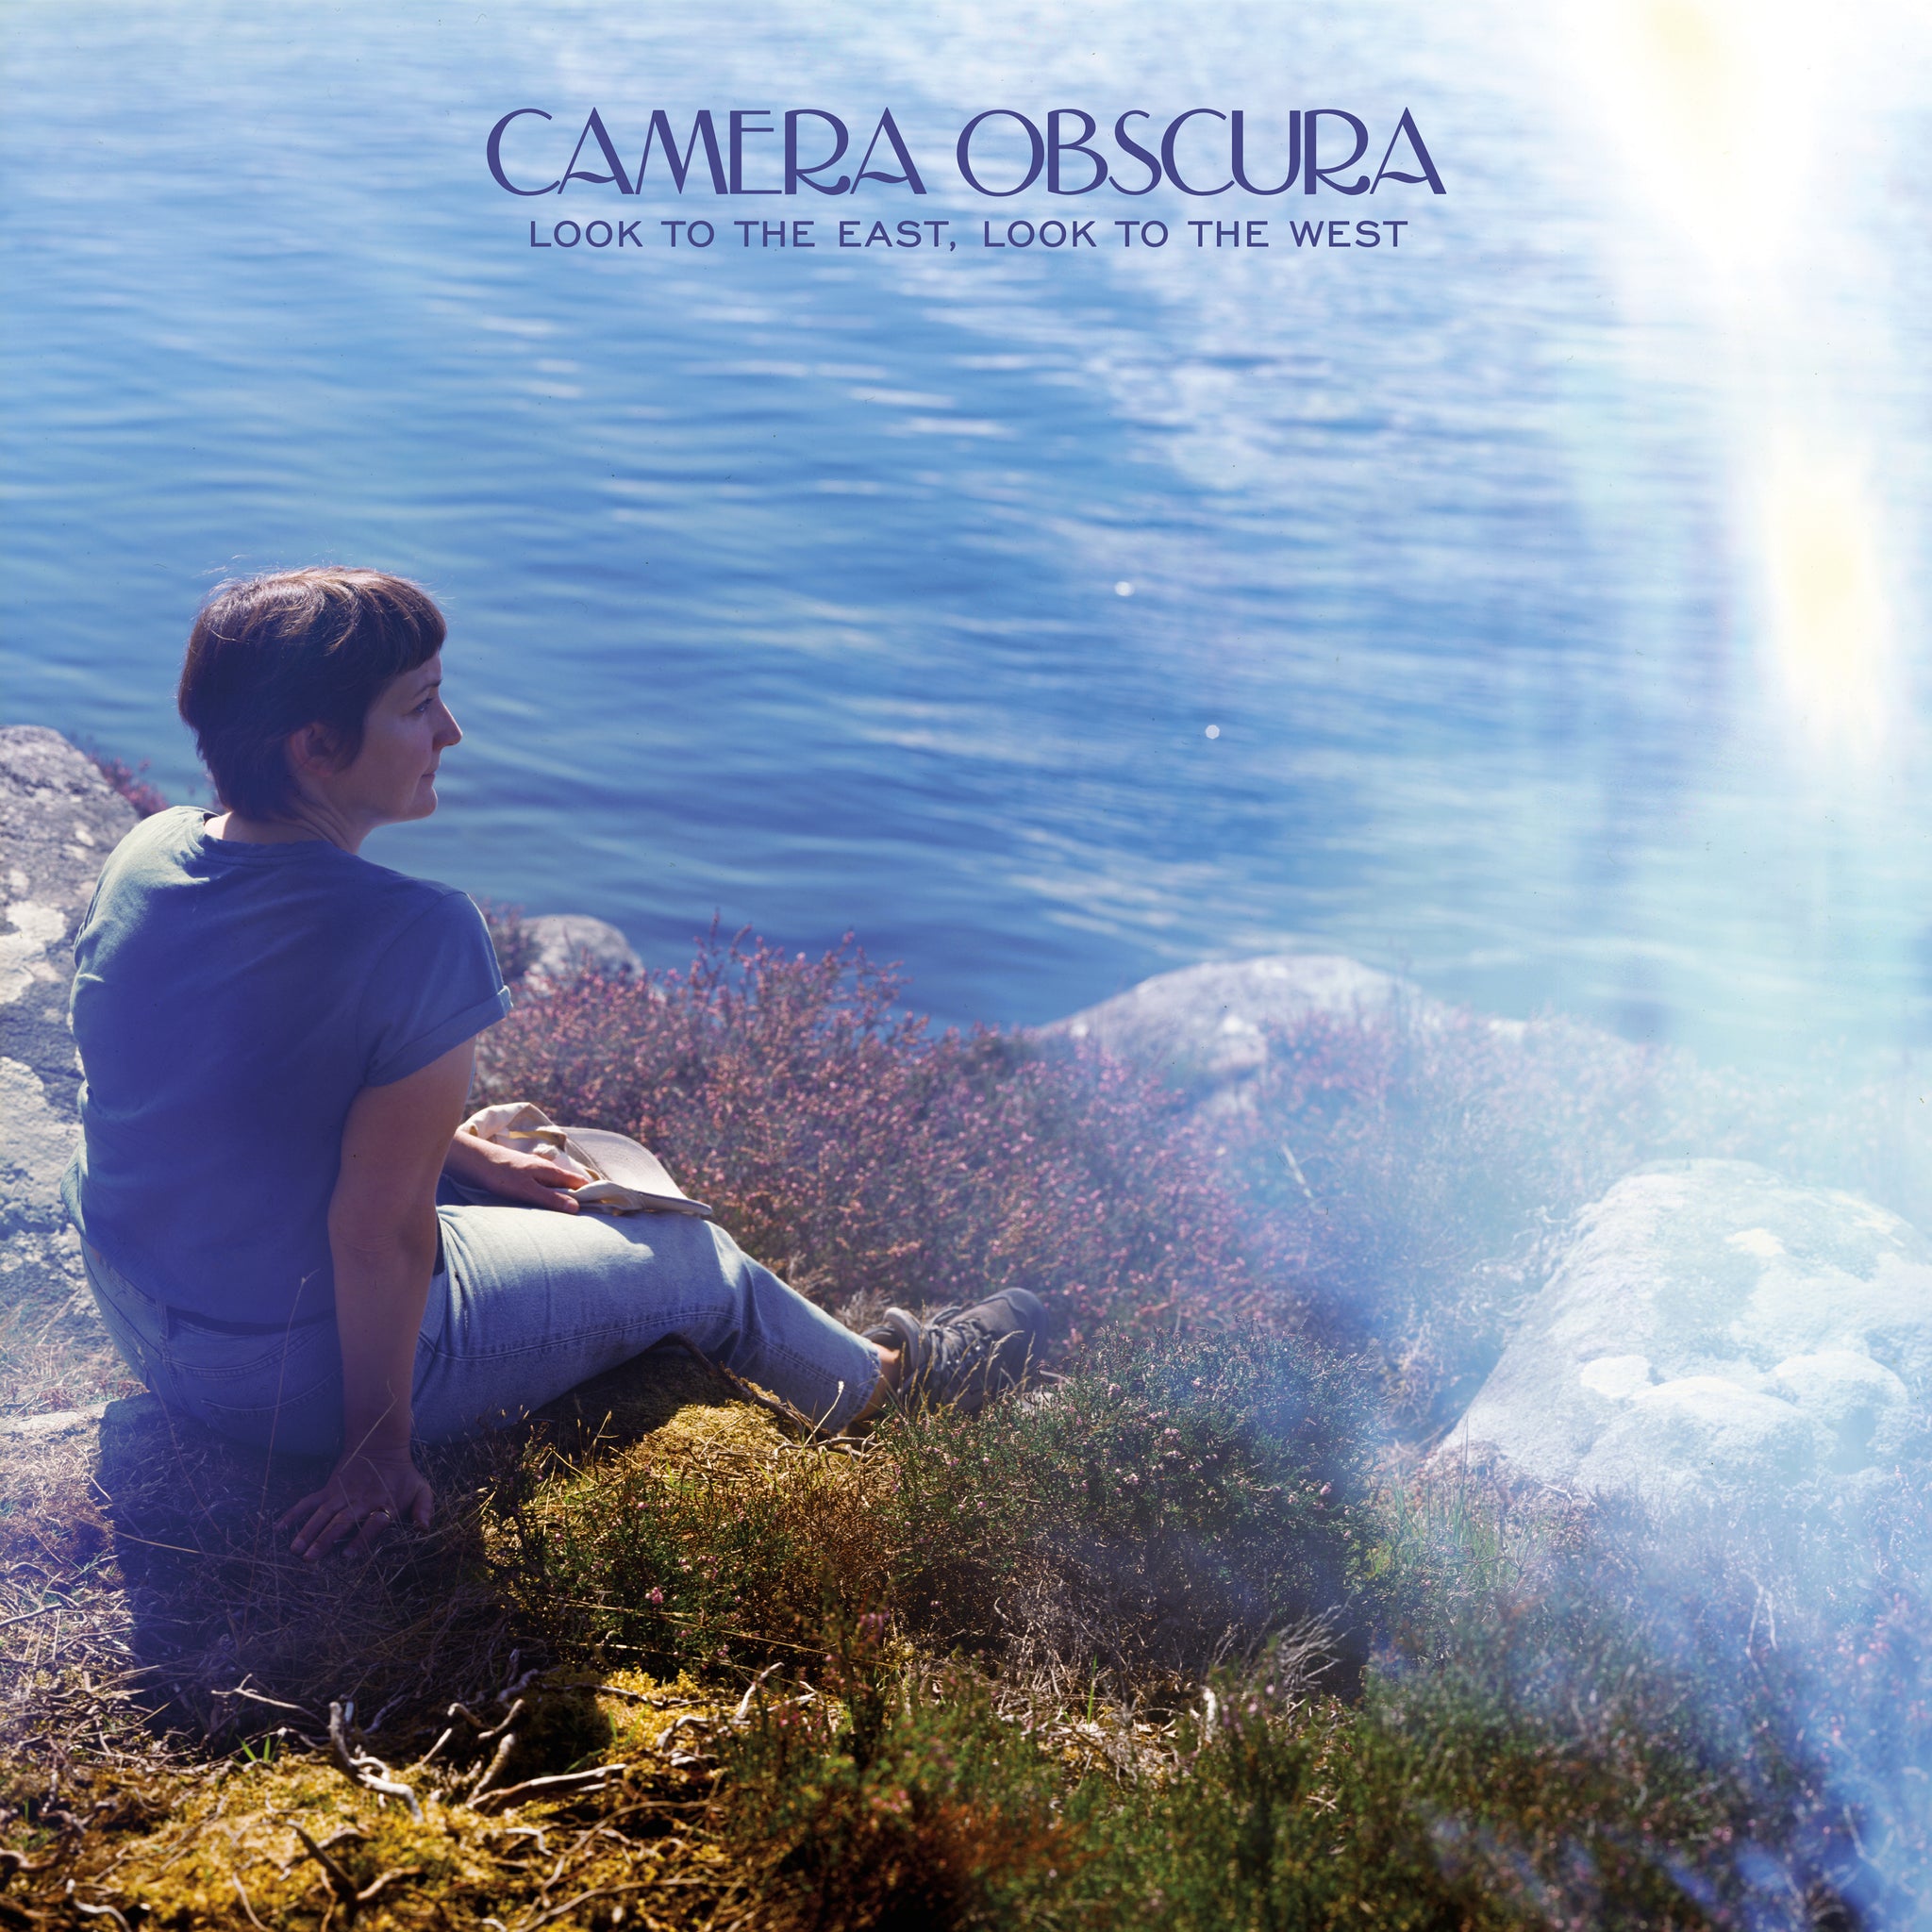 PRE-ORDER: CAMERA OBSCURA - LOOK TO THE EAST, LOOK TO THE WEST Vinyl LP